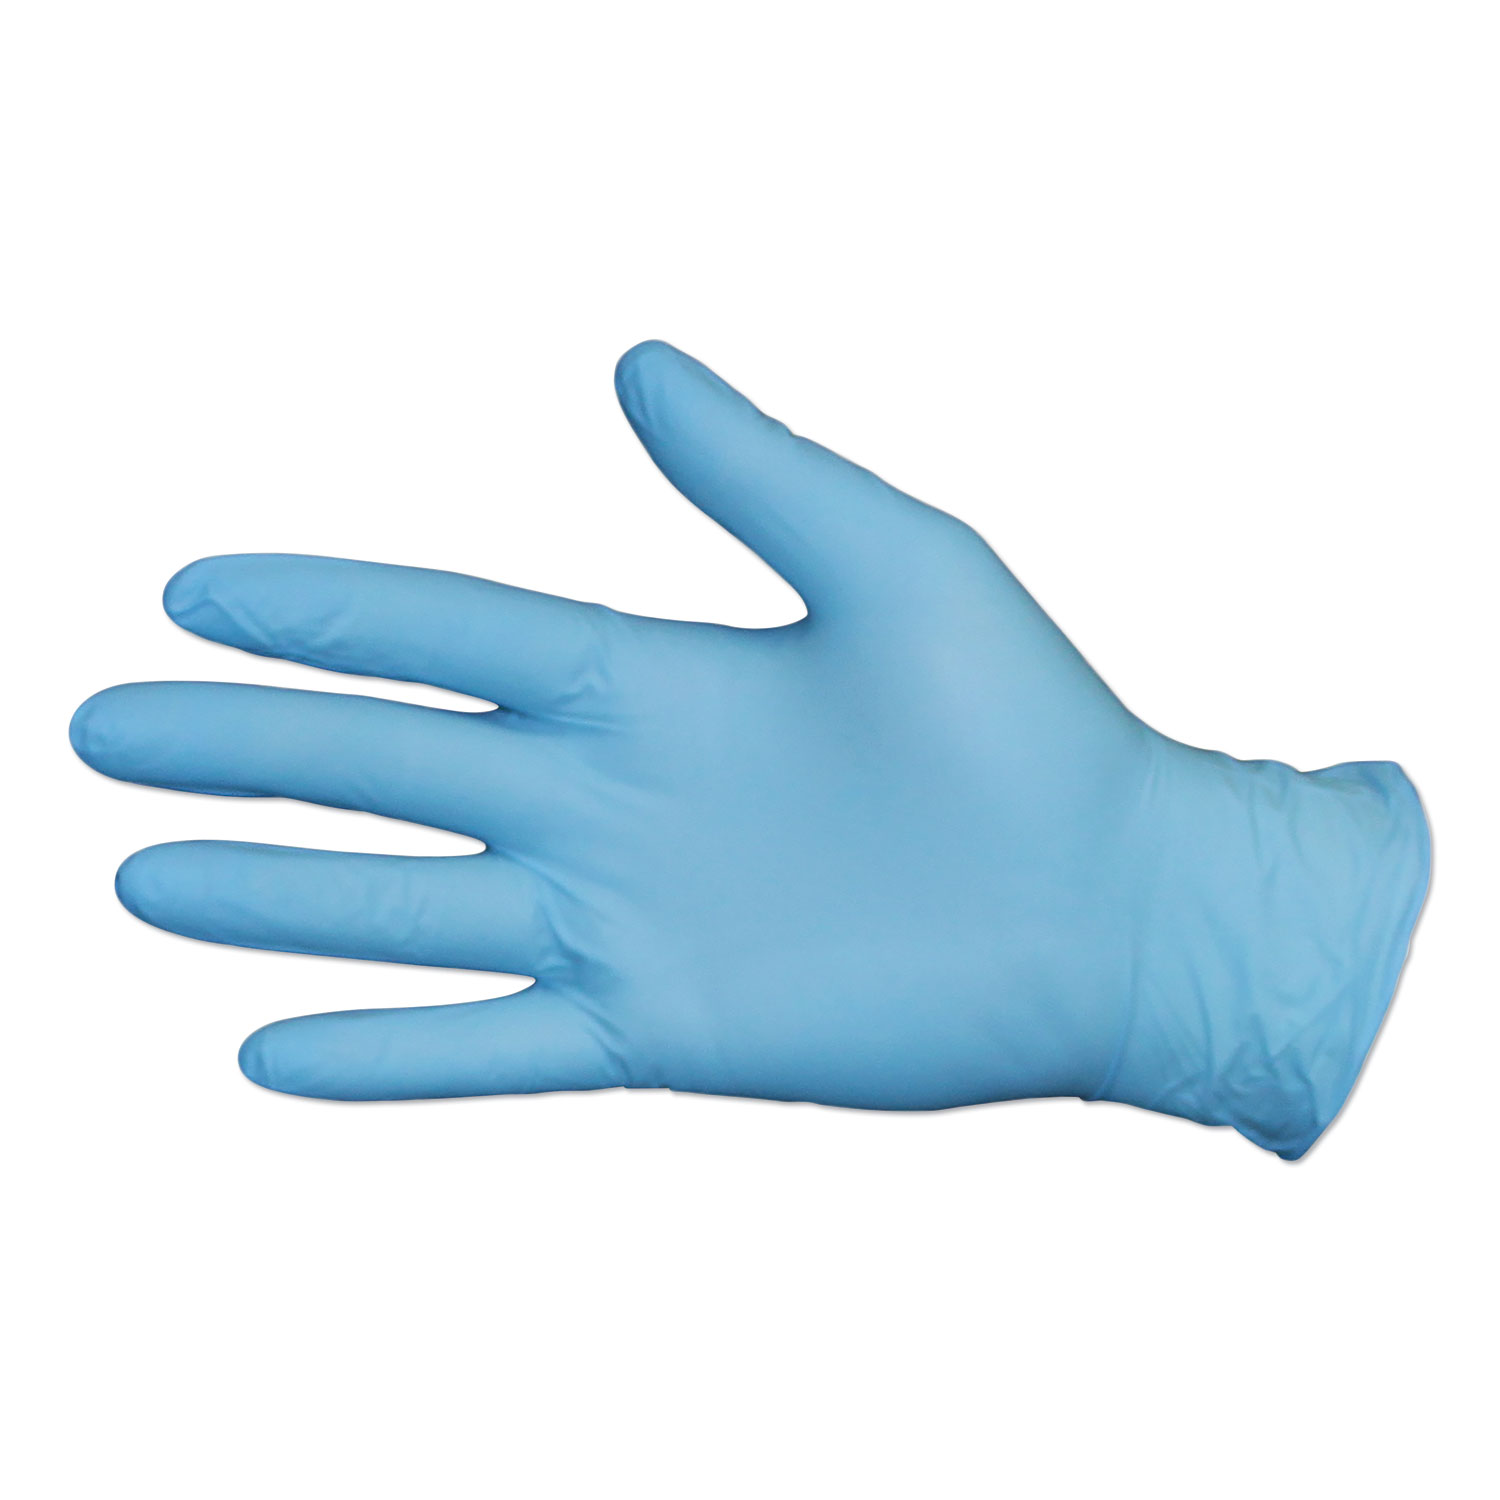  Impact 8645S DiversaMed Disposable Powder-Free Exam Nitrile Gloves, Blue, Small, 100/Box (IMP8645SBX) 